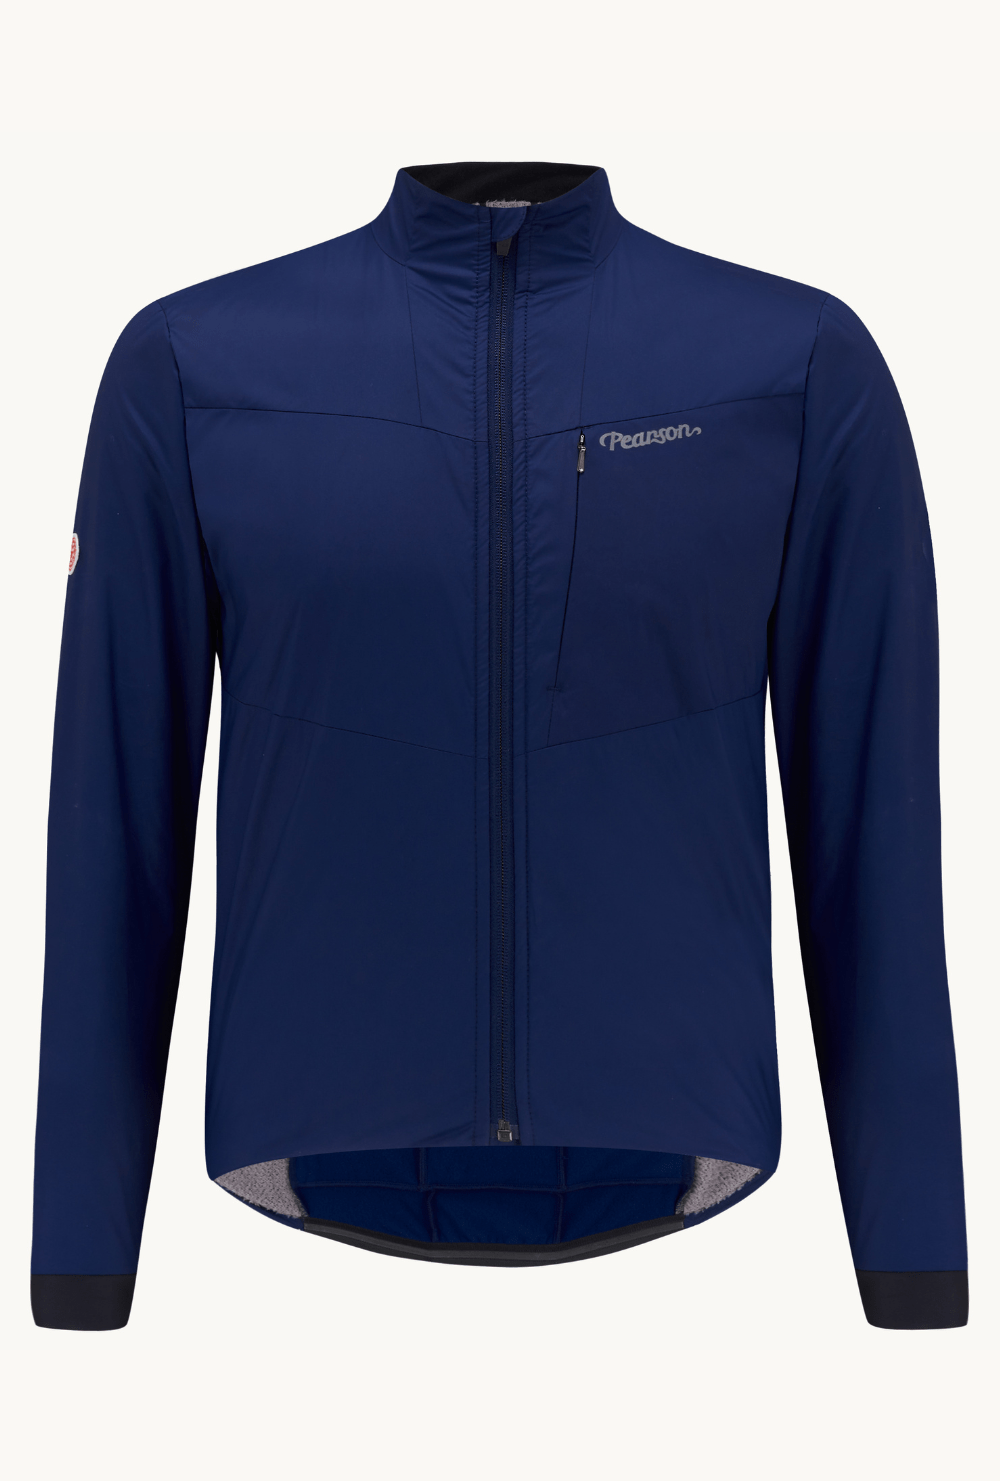 Pearson Cycles Pearson 1860, Test Your Mettle - Polartec® Insulated Jacket Blue Ink, Blue Ink / Small